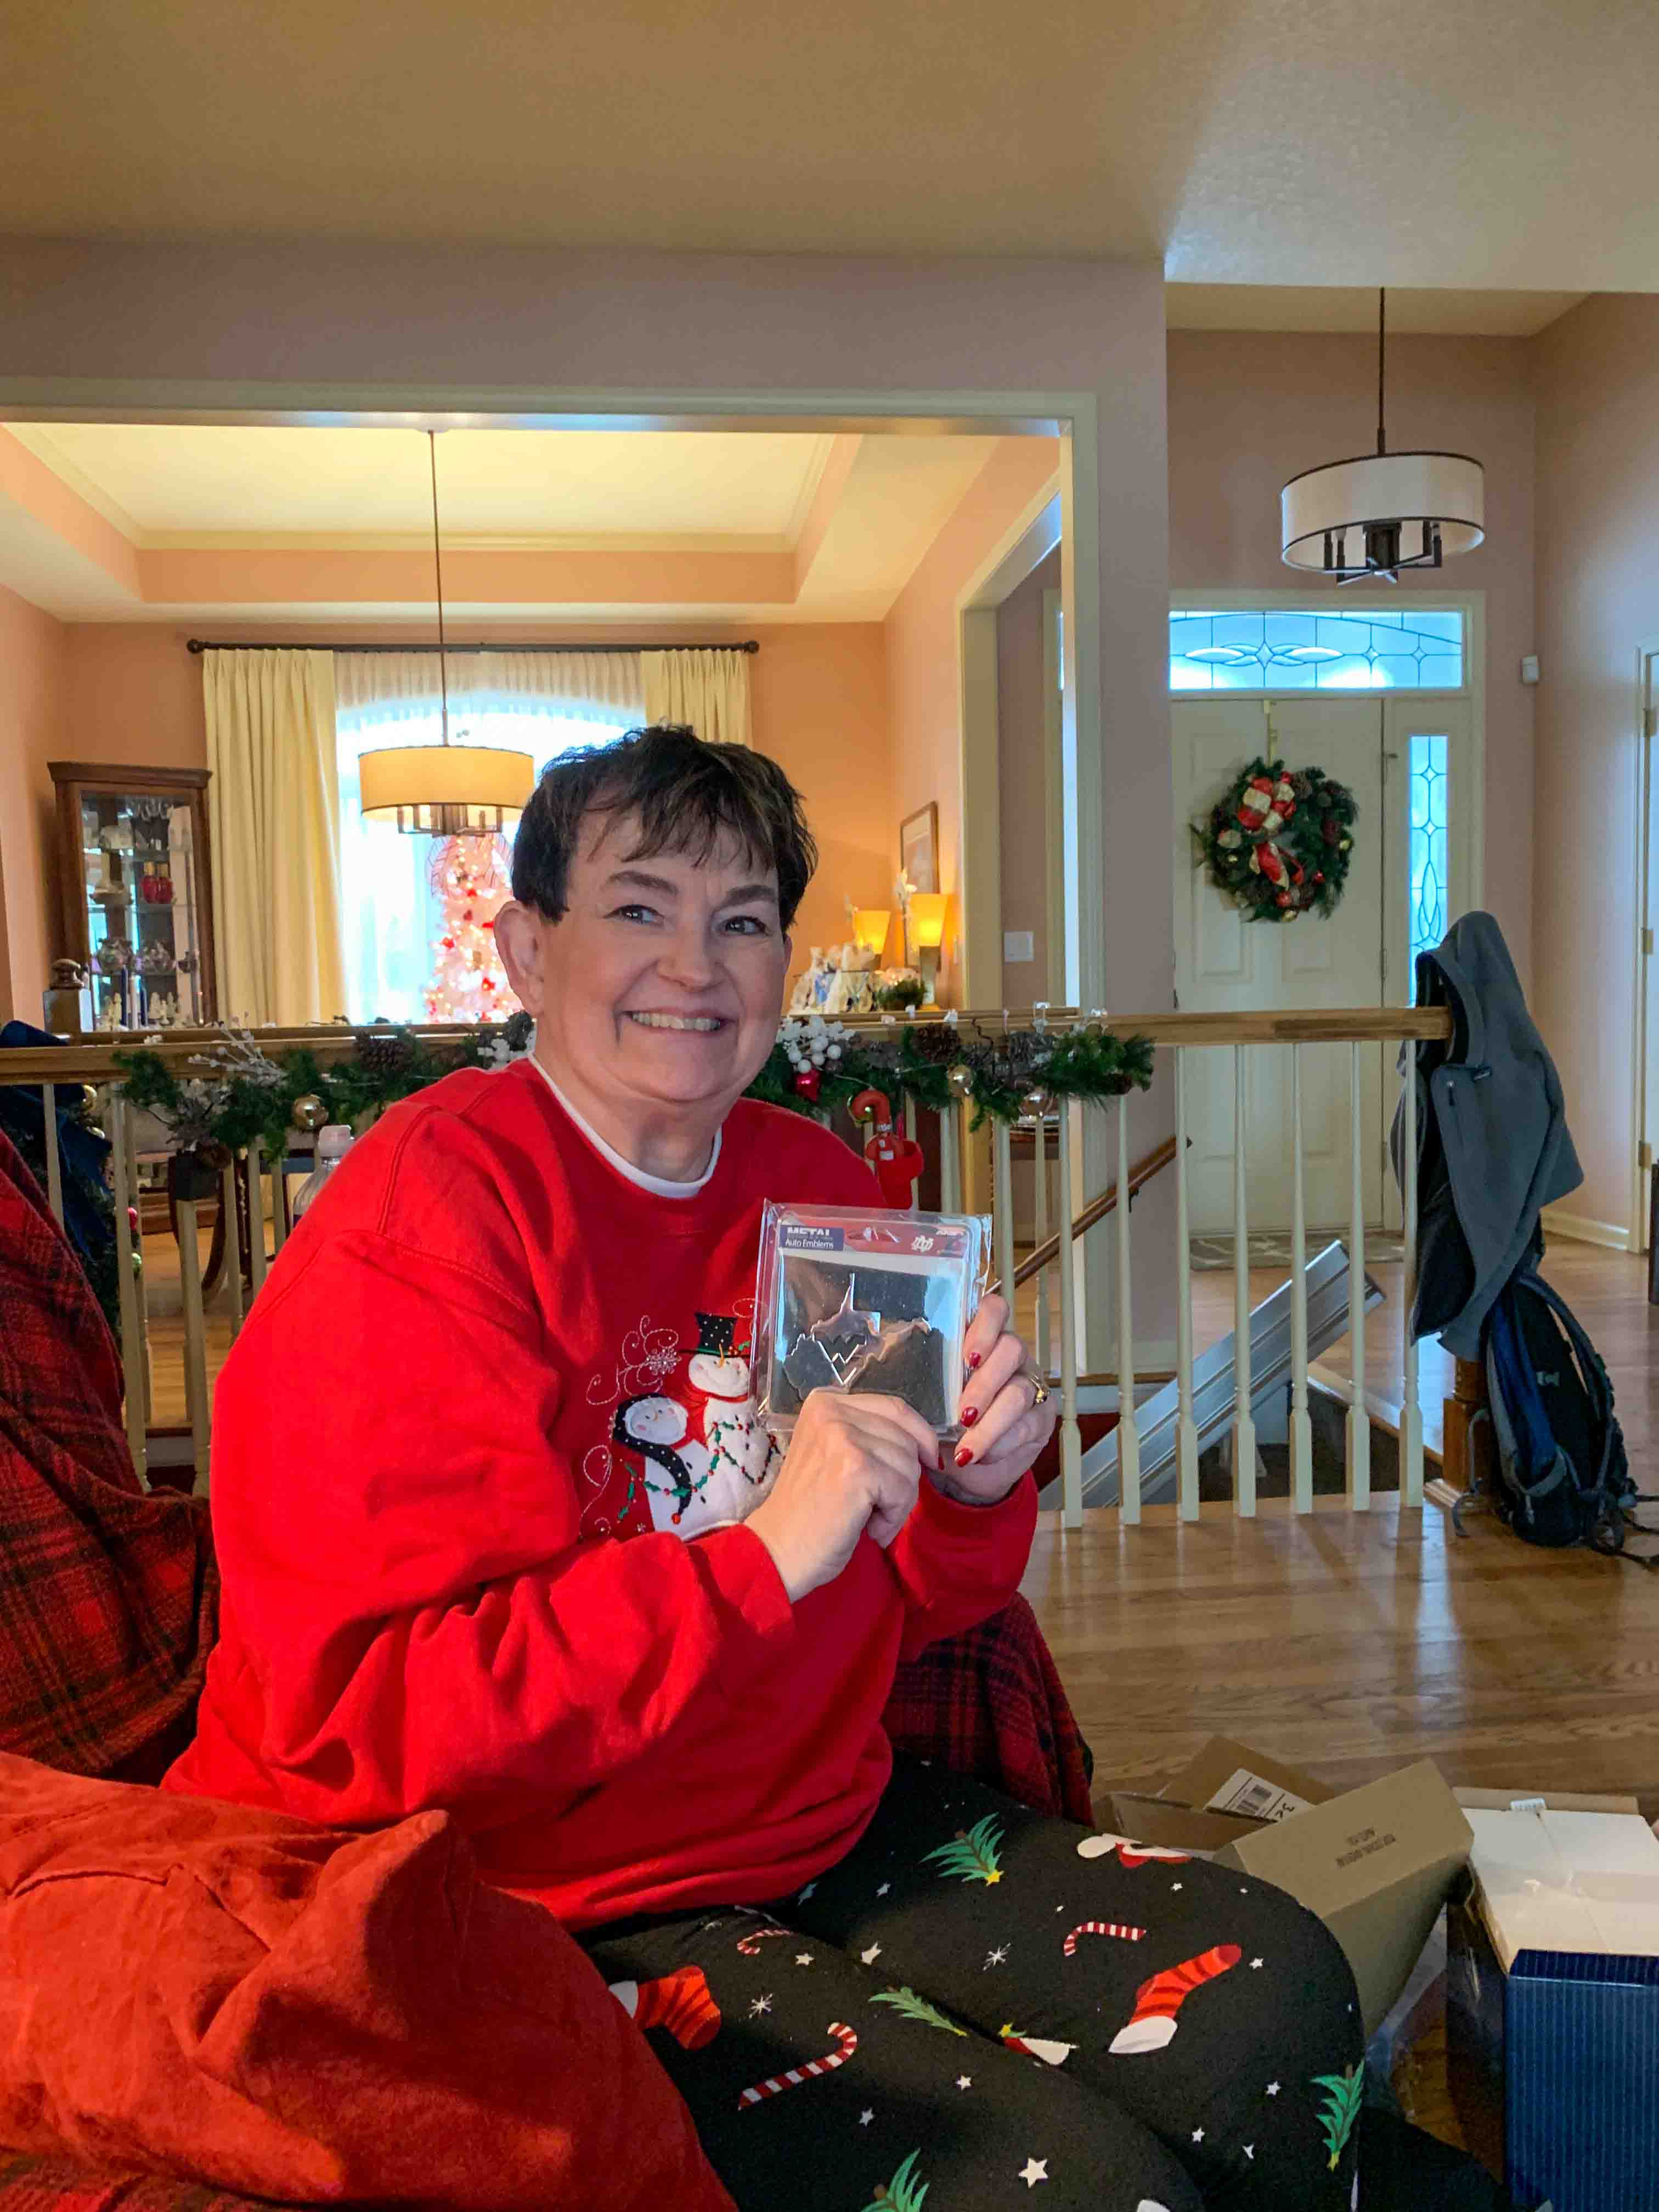 Opening gifts - this one is a special WVU decal for her car - thanks Brian!                                        Location:  11207 Wilmar Dr, Liberty MO 64068                                 Source: Julane Crabtree                                Date:  25 Dec 2022